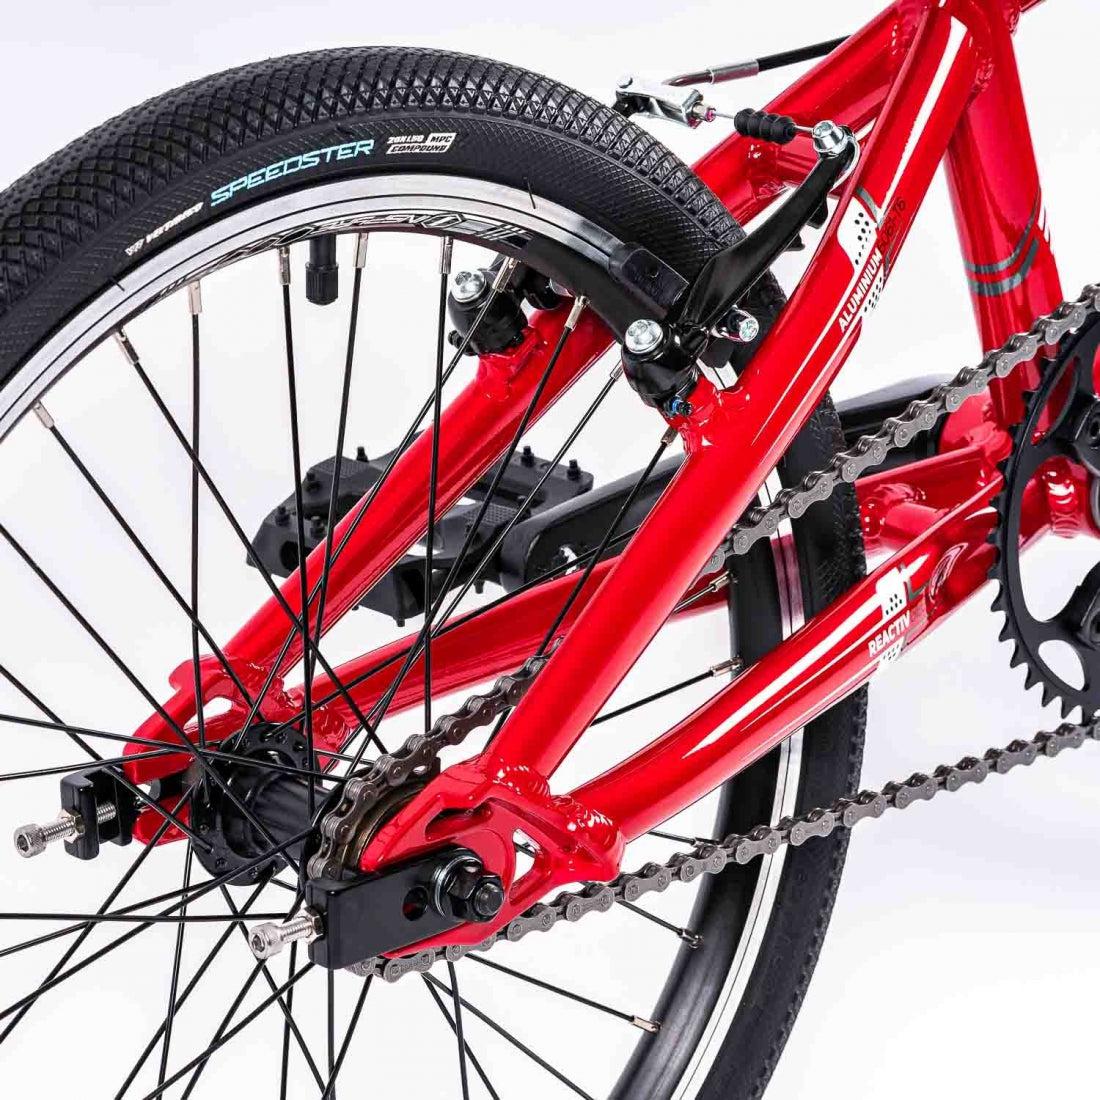 Close-up view of the rear wheel, chain, and gear mechanism of an Inspyre Neo Mini Bike designed for entry-level BMX racing.